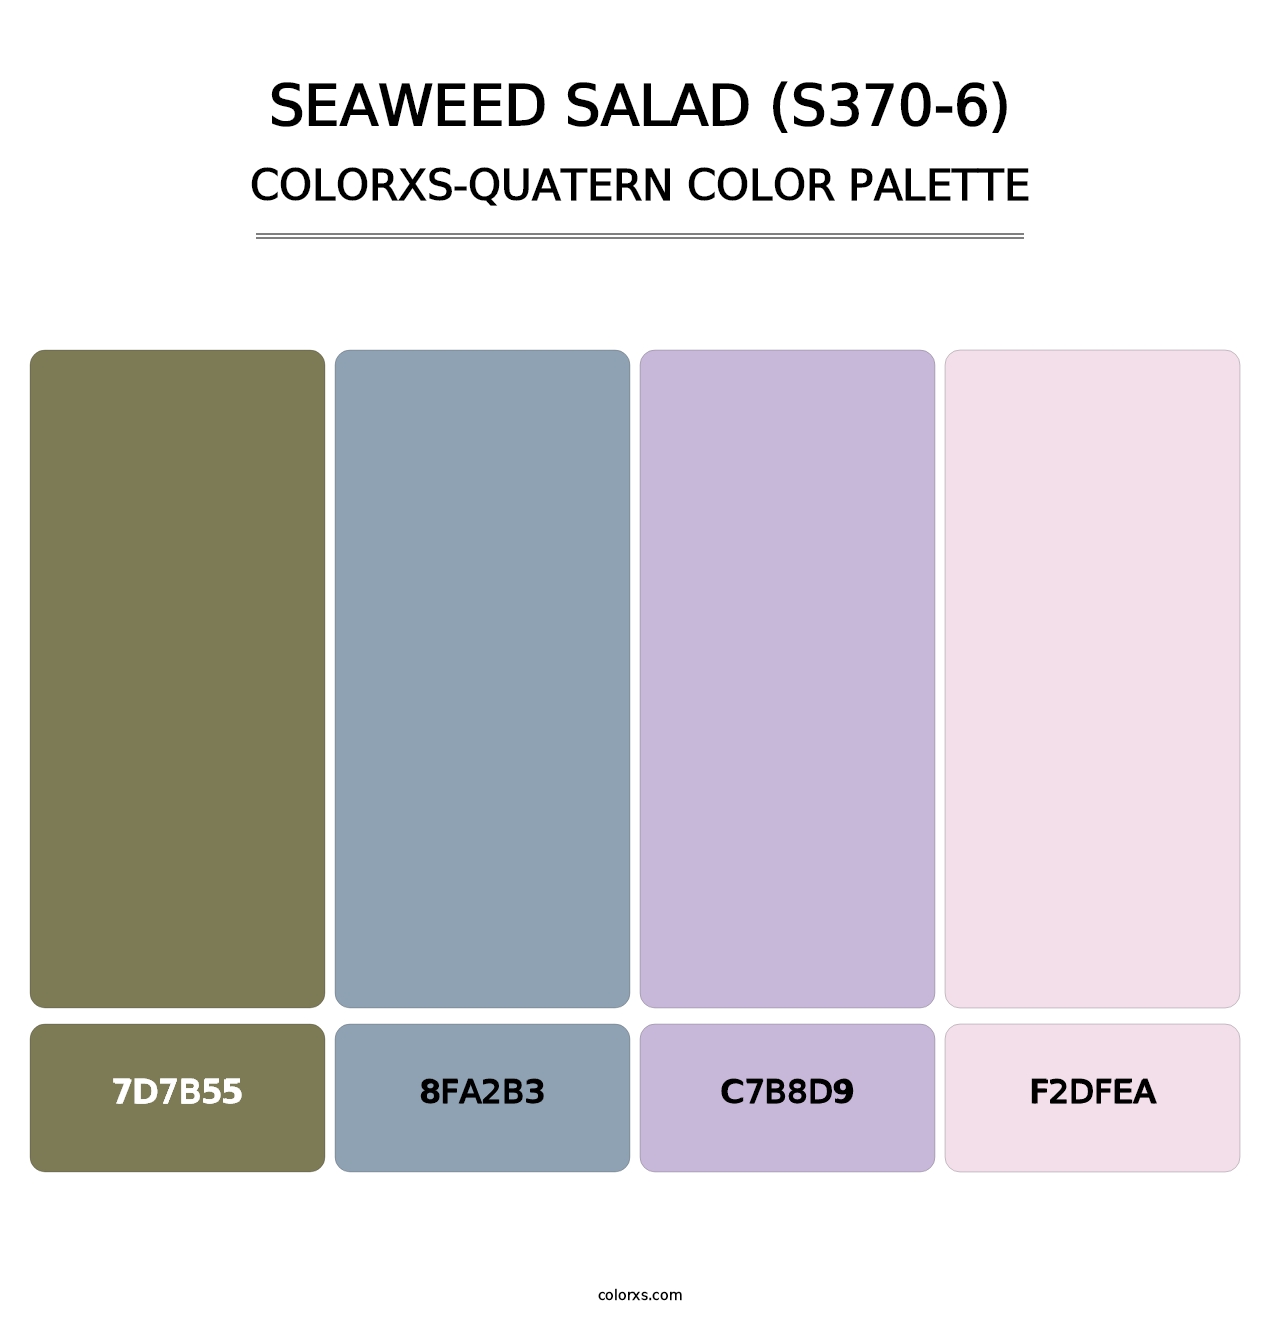 Seaweed Salad (S370-6) - Colorxs Quatern Palette